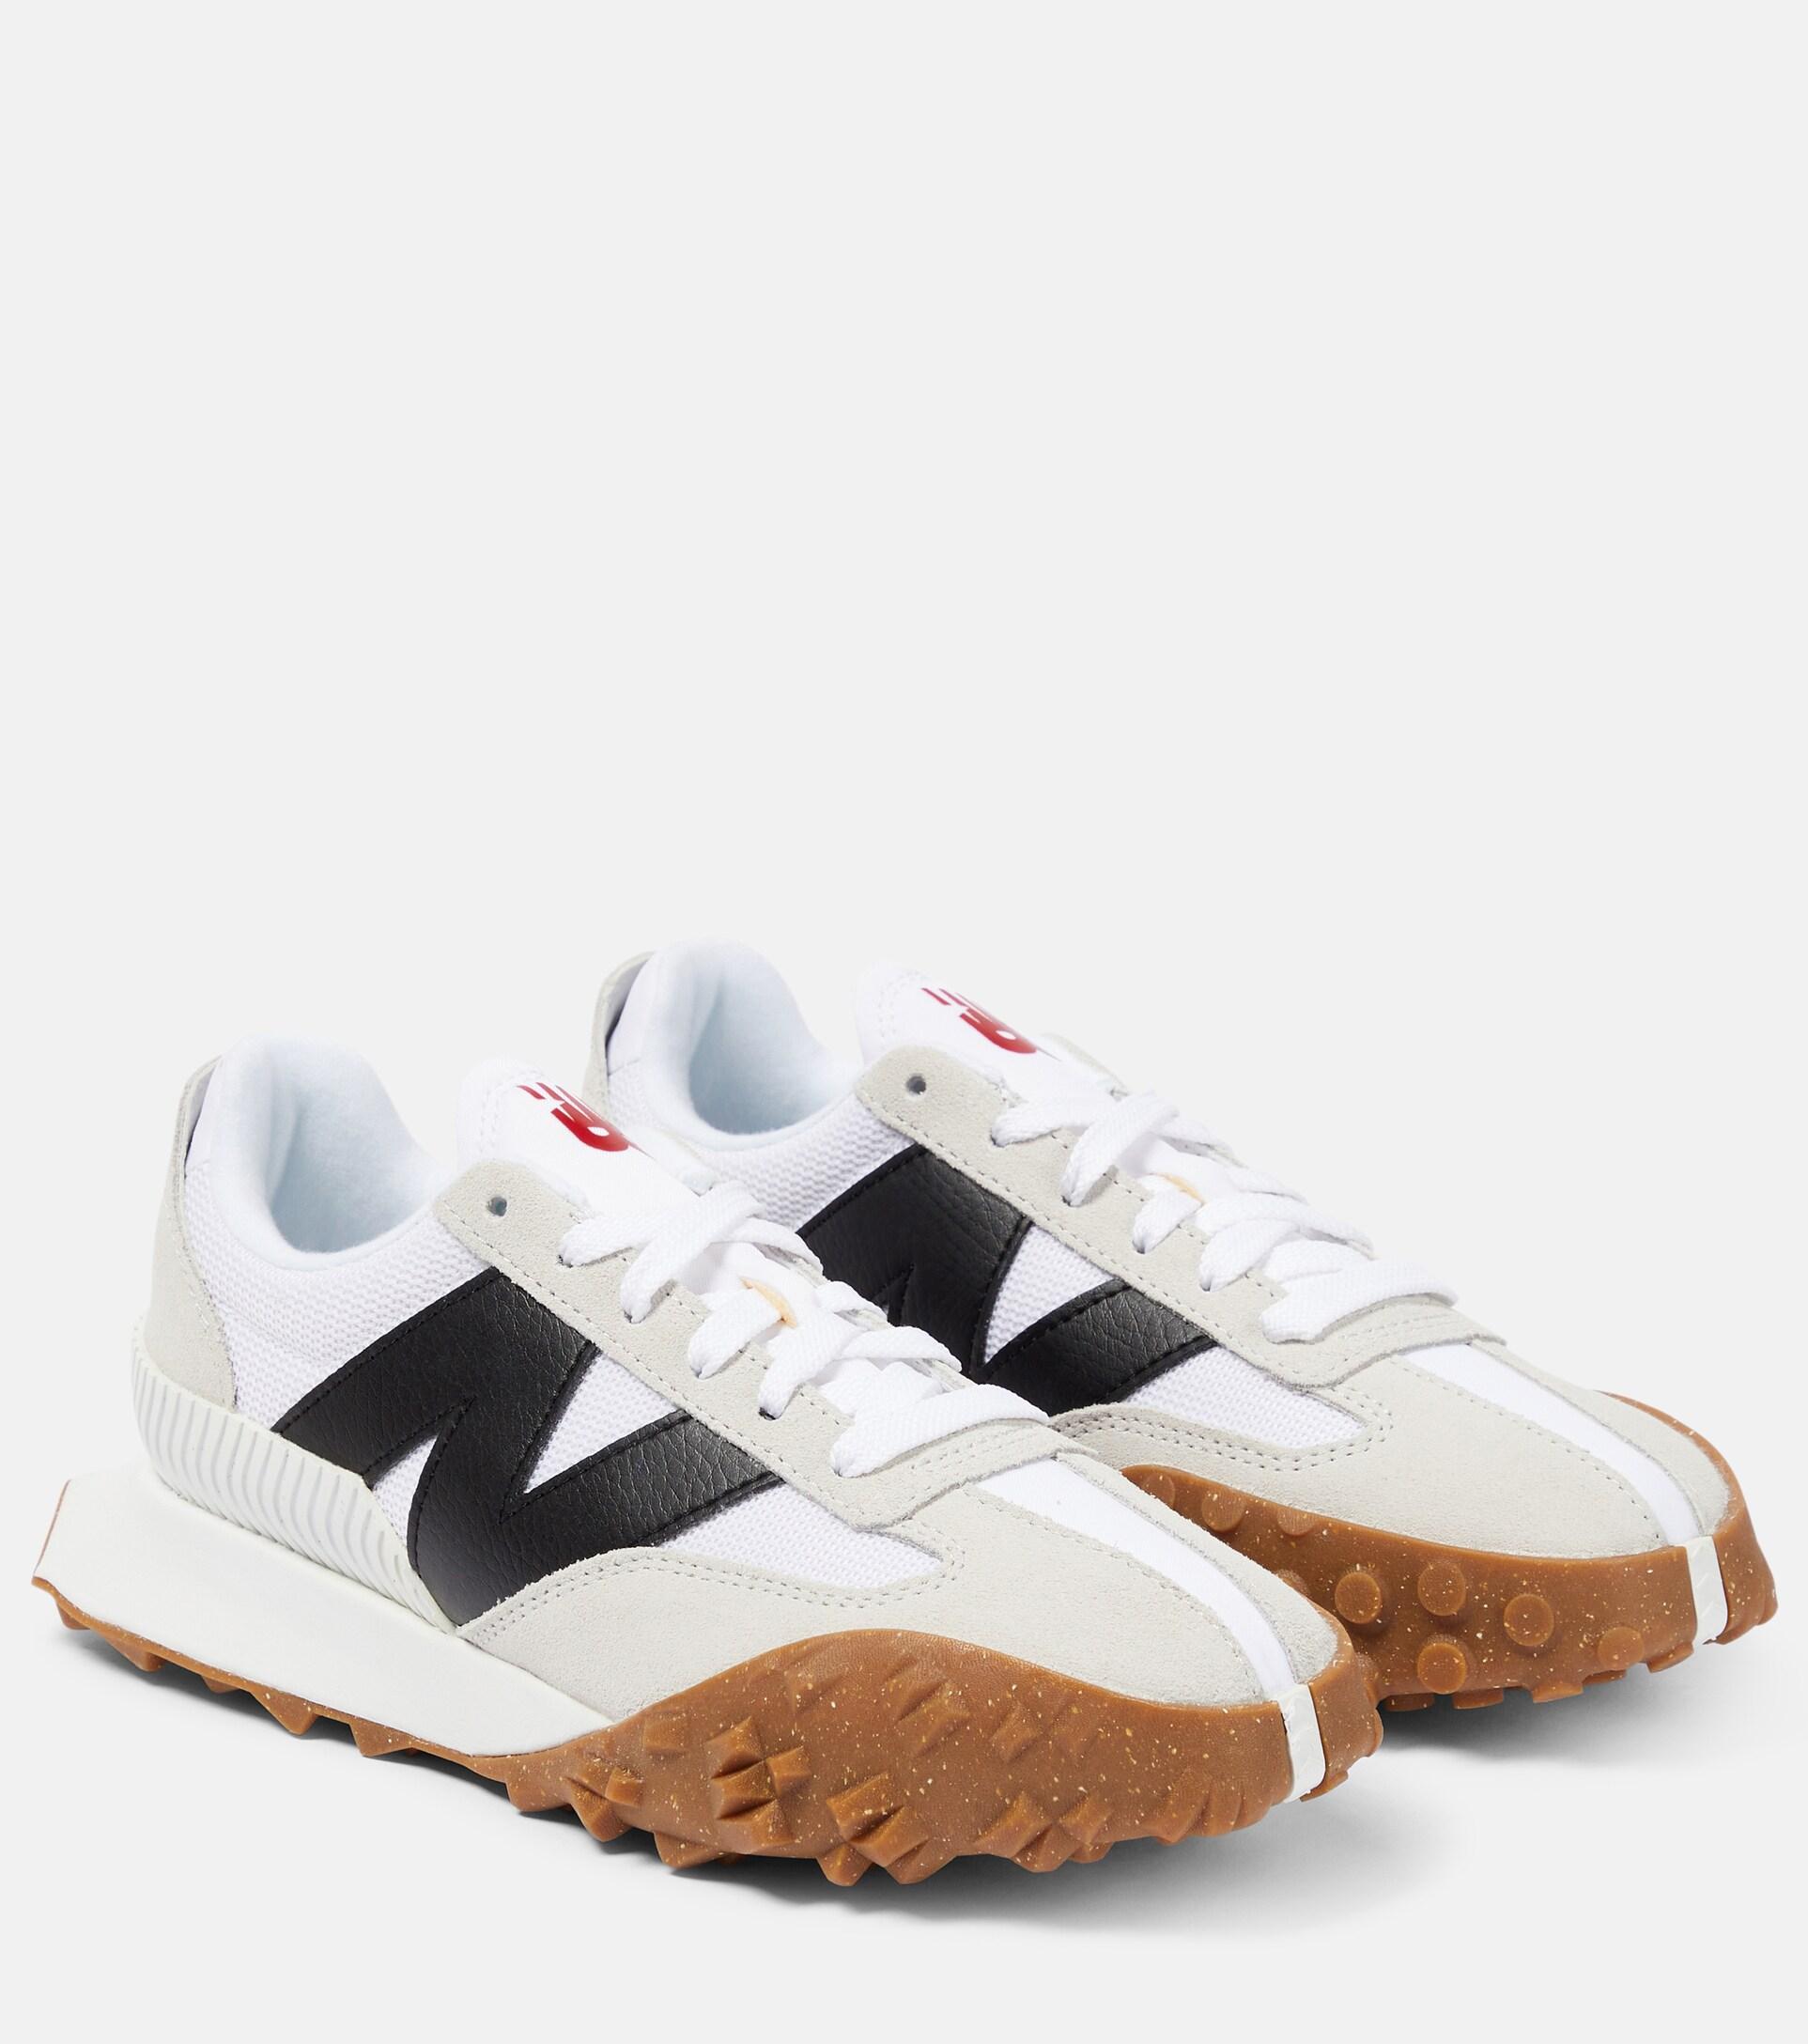 New Balance Xc-72 Sneakers in White | Lyst